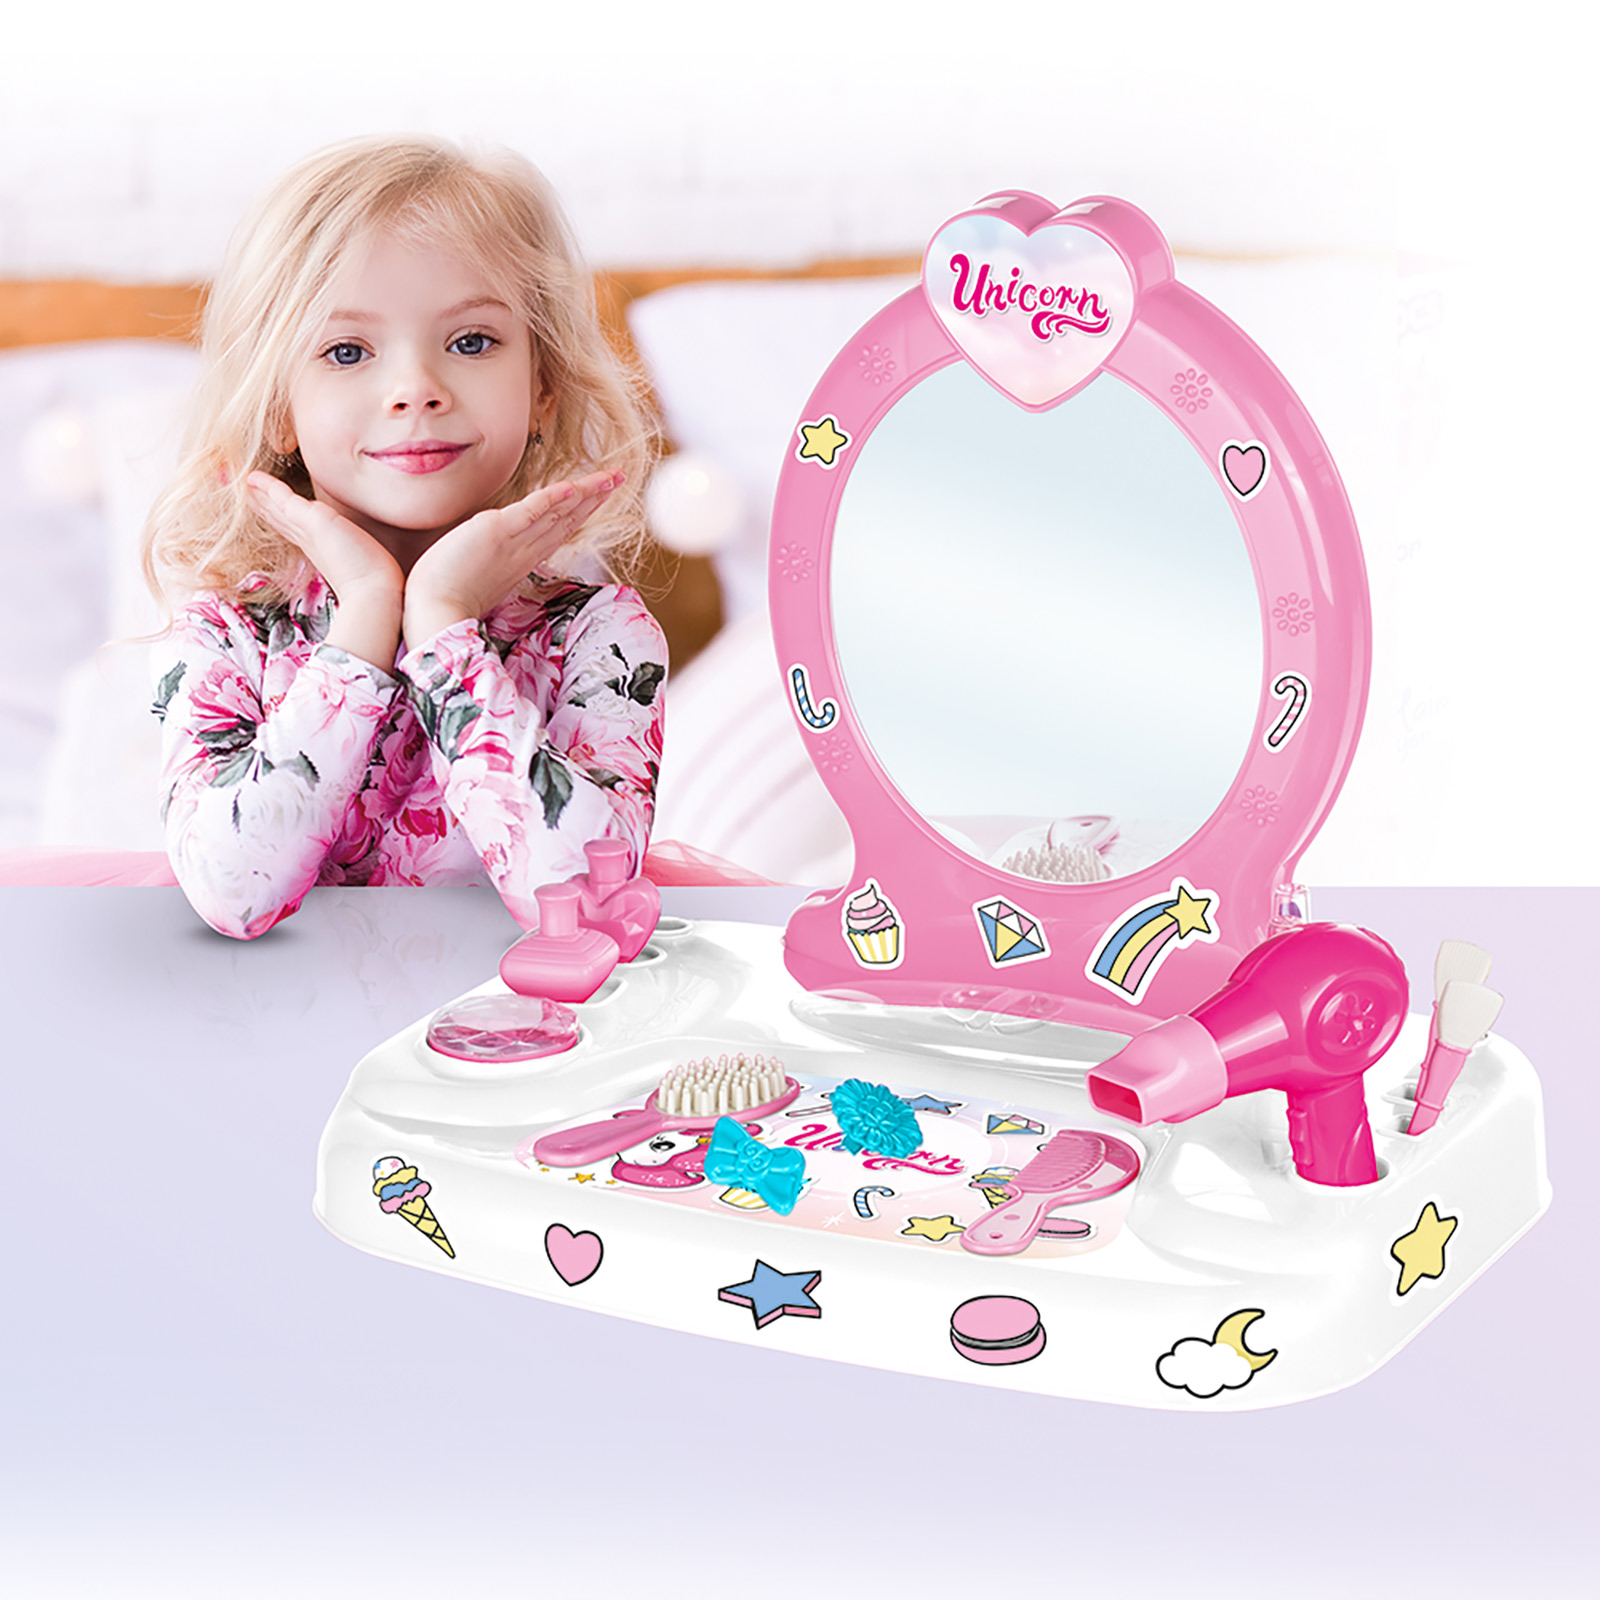 Unicorn Table Top Vanity Set With Mirror & Accessories - Pink (3 - 6 Years)